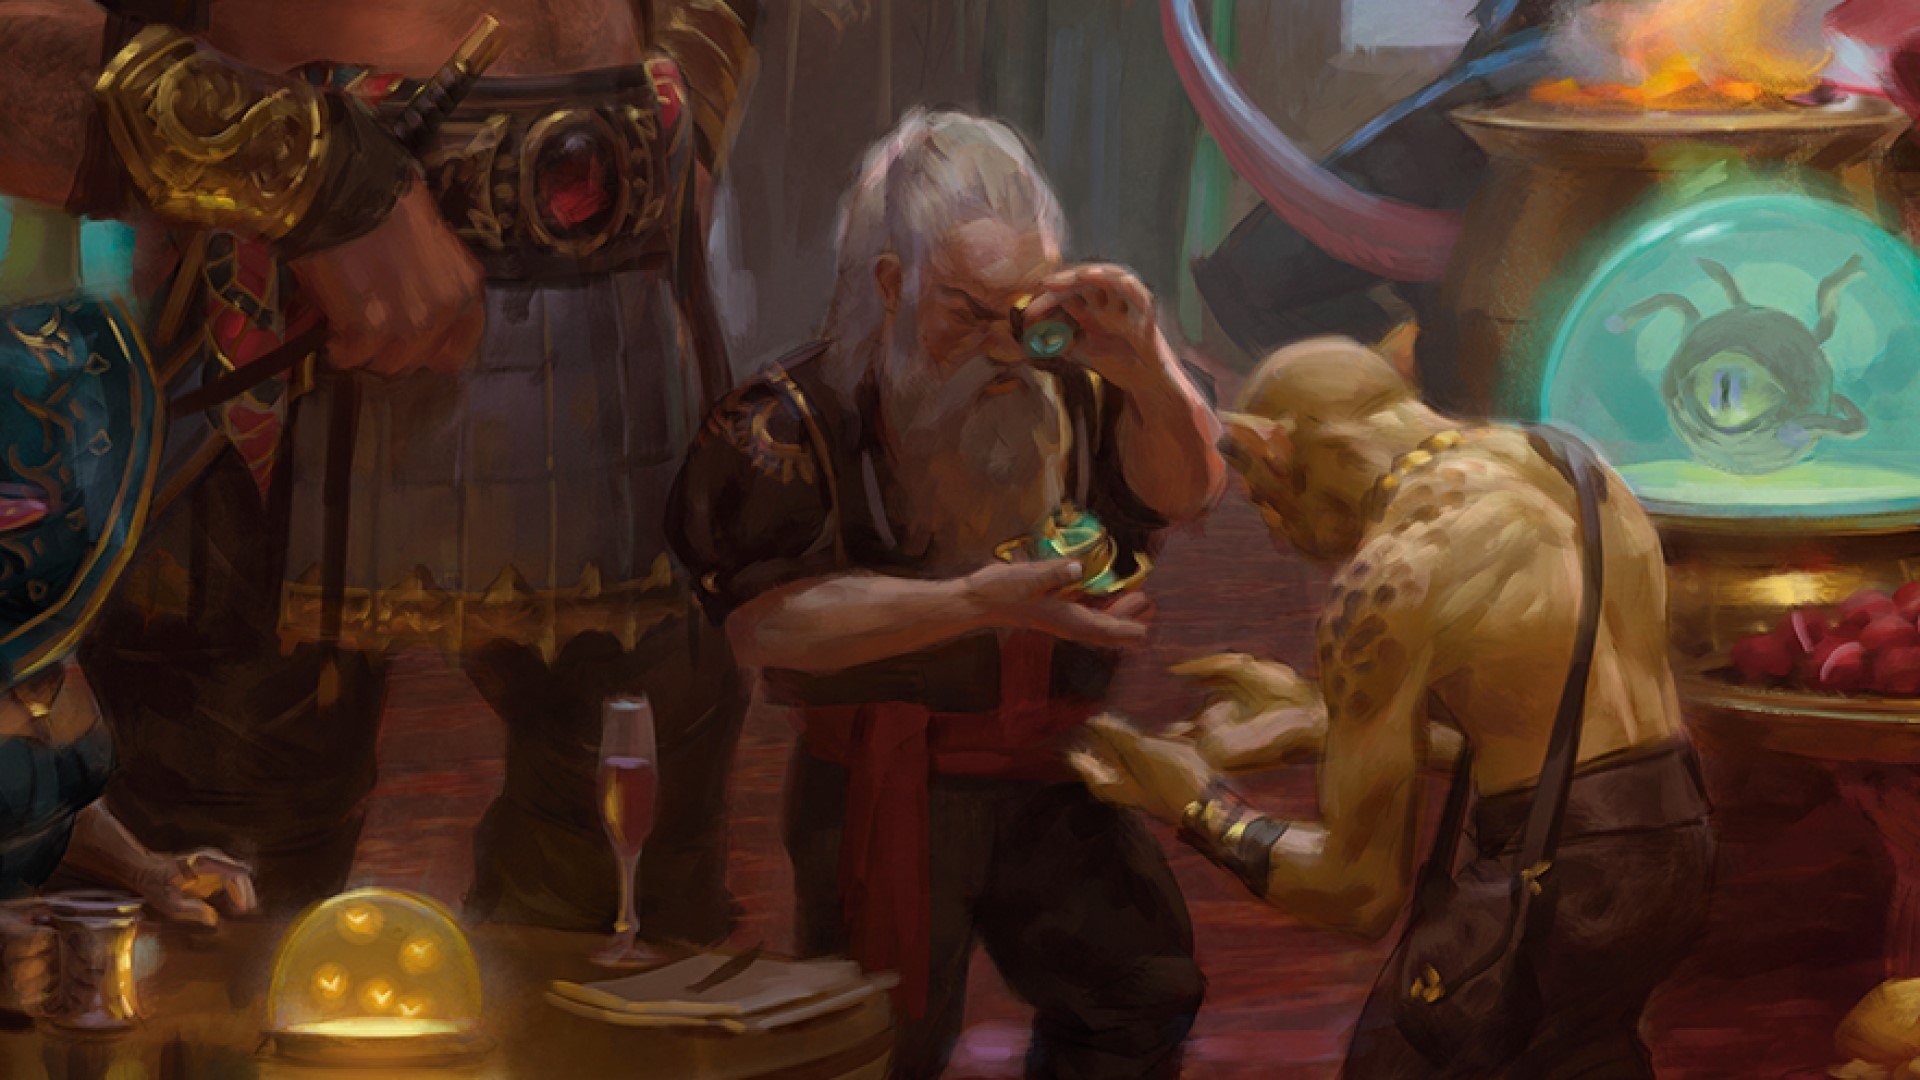 DnD dwarf 5e appraising a jewel for a goblin (art by Wizards of the Coast)